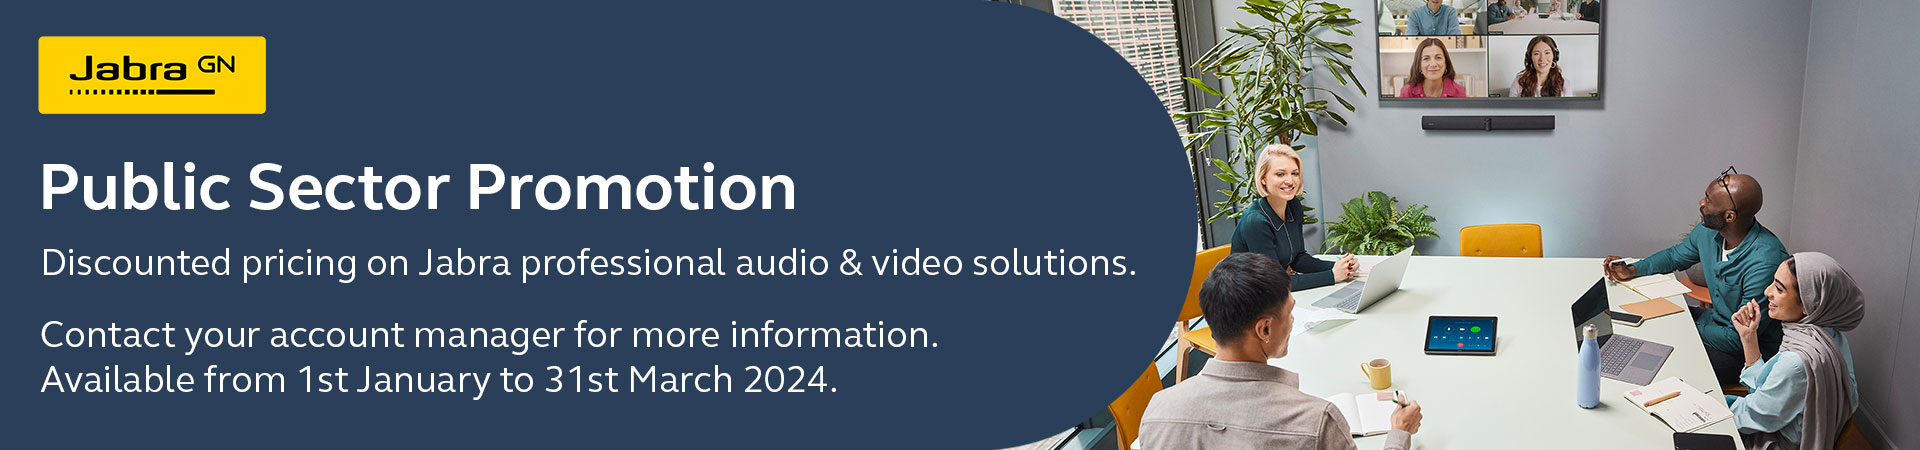 Jabra GN - Public Sector Promotion - Discounted pricing on Jabra professional audio & video solutions. Contact your account manager for more information. Available from 1st January to 31st March 2024.